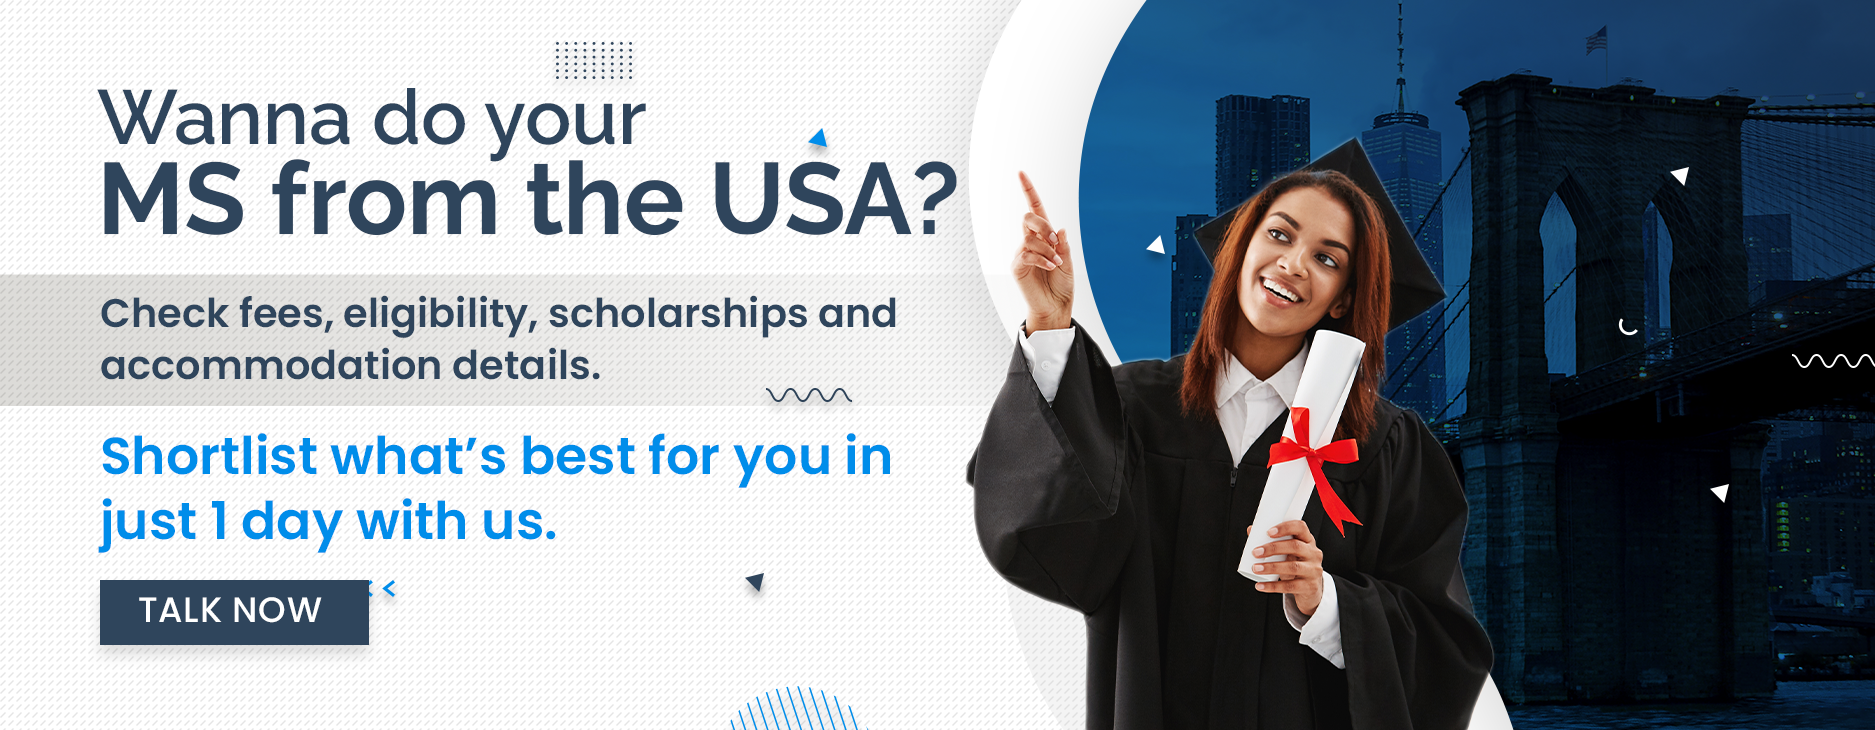 Complete your MS from the USA